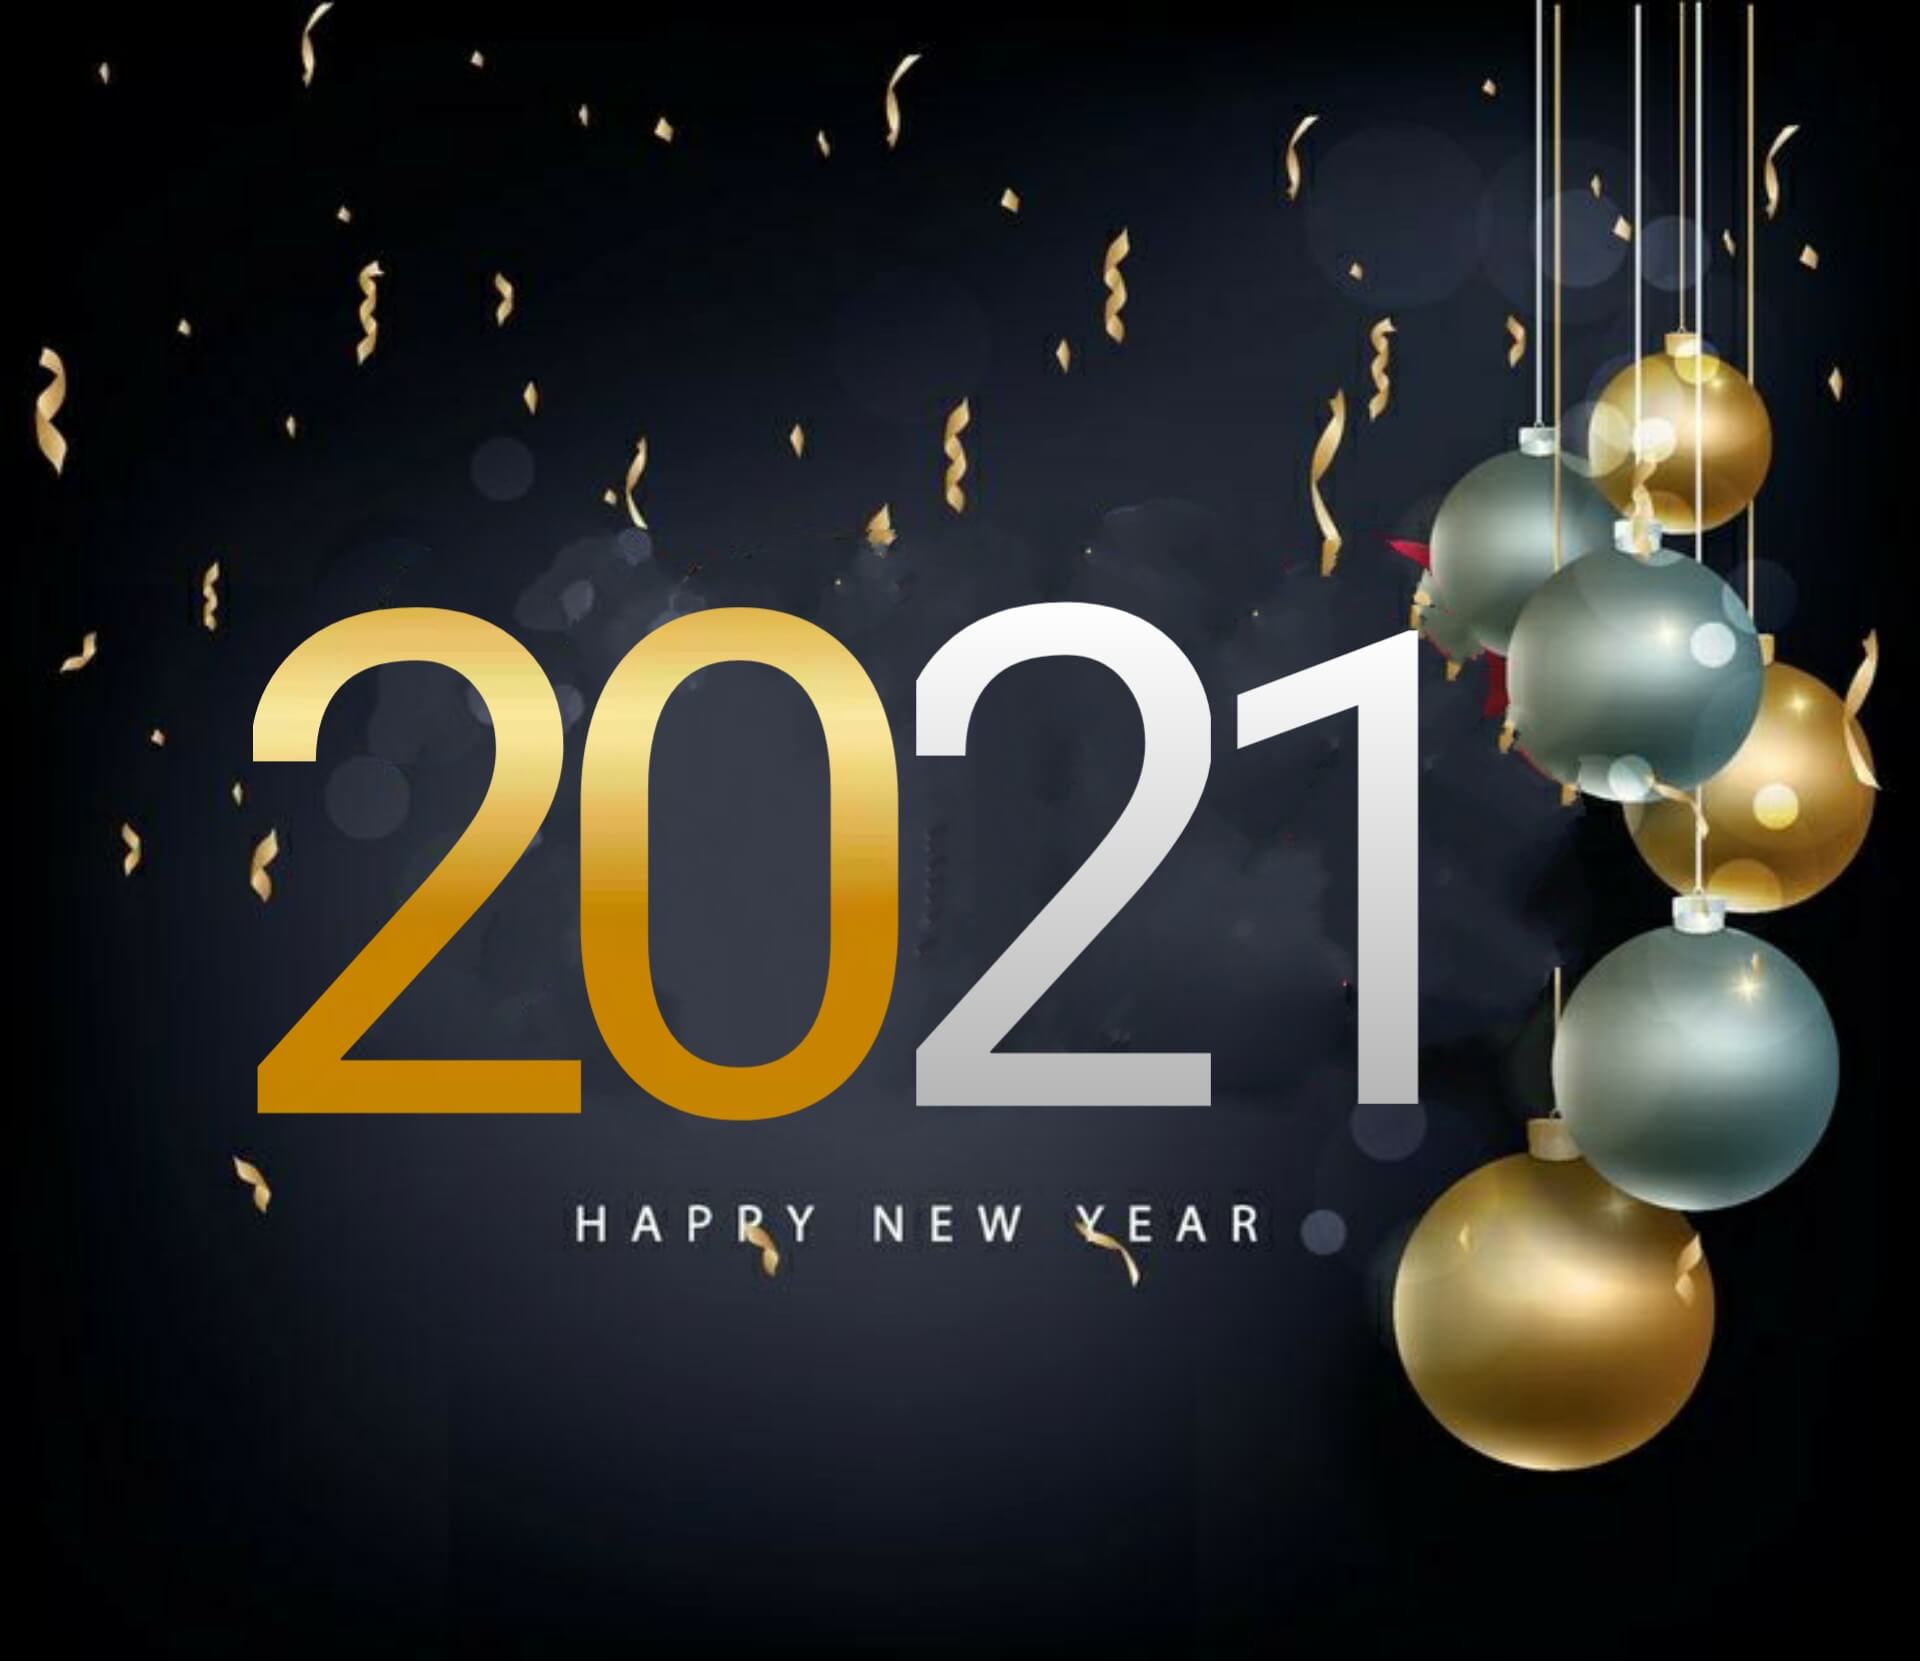 Happy New Year 2021 Image Wishes, Greetings, Quotes, Sms & Gifs HD